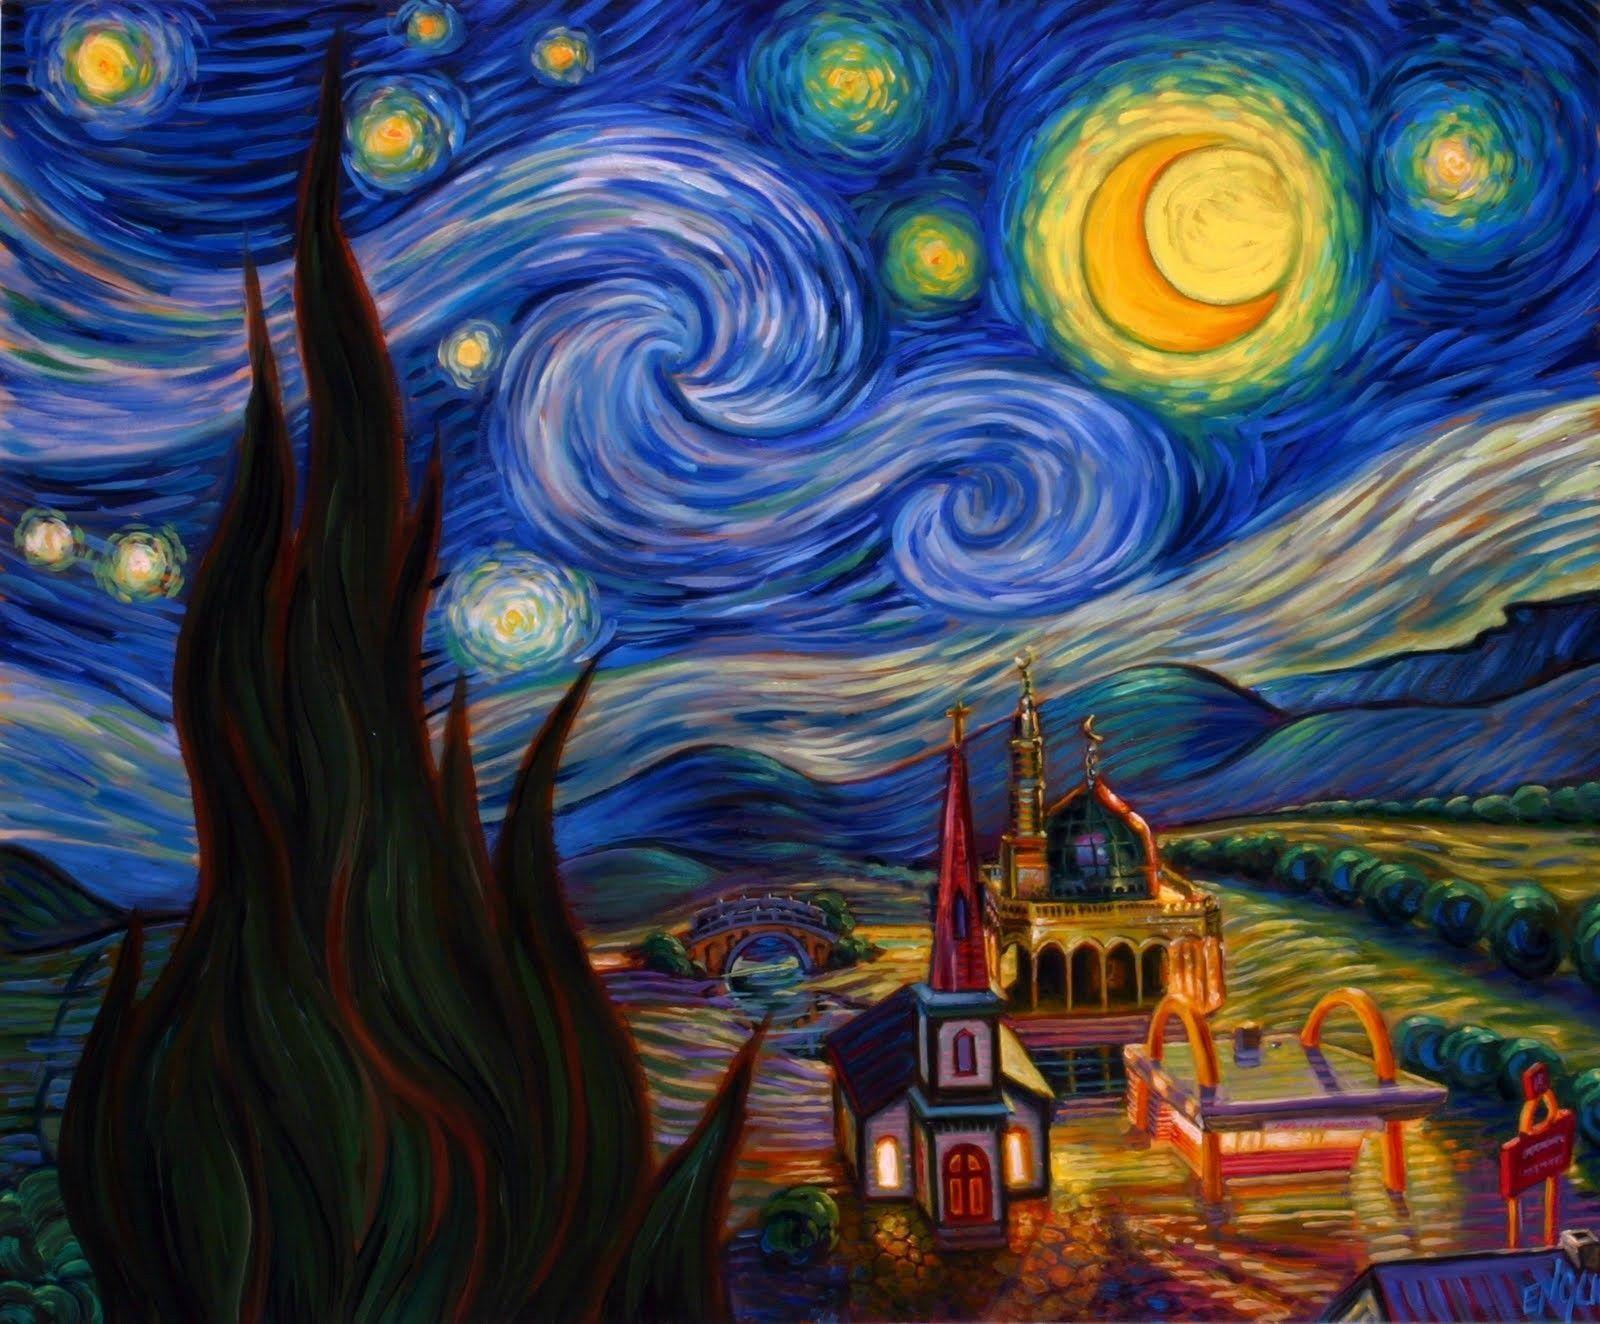 Painting of Vincent Van Gogh wallpaper and image